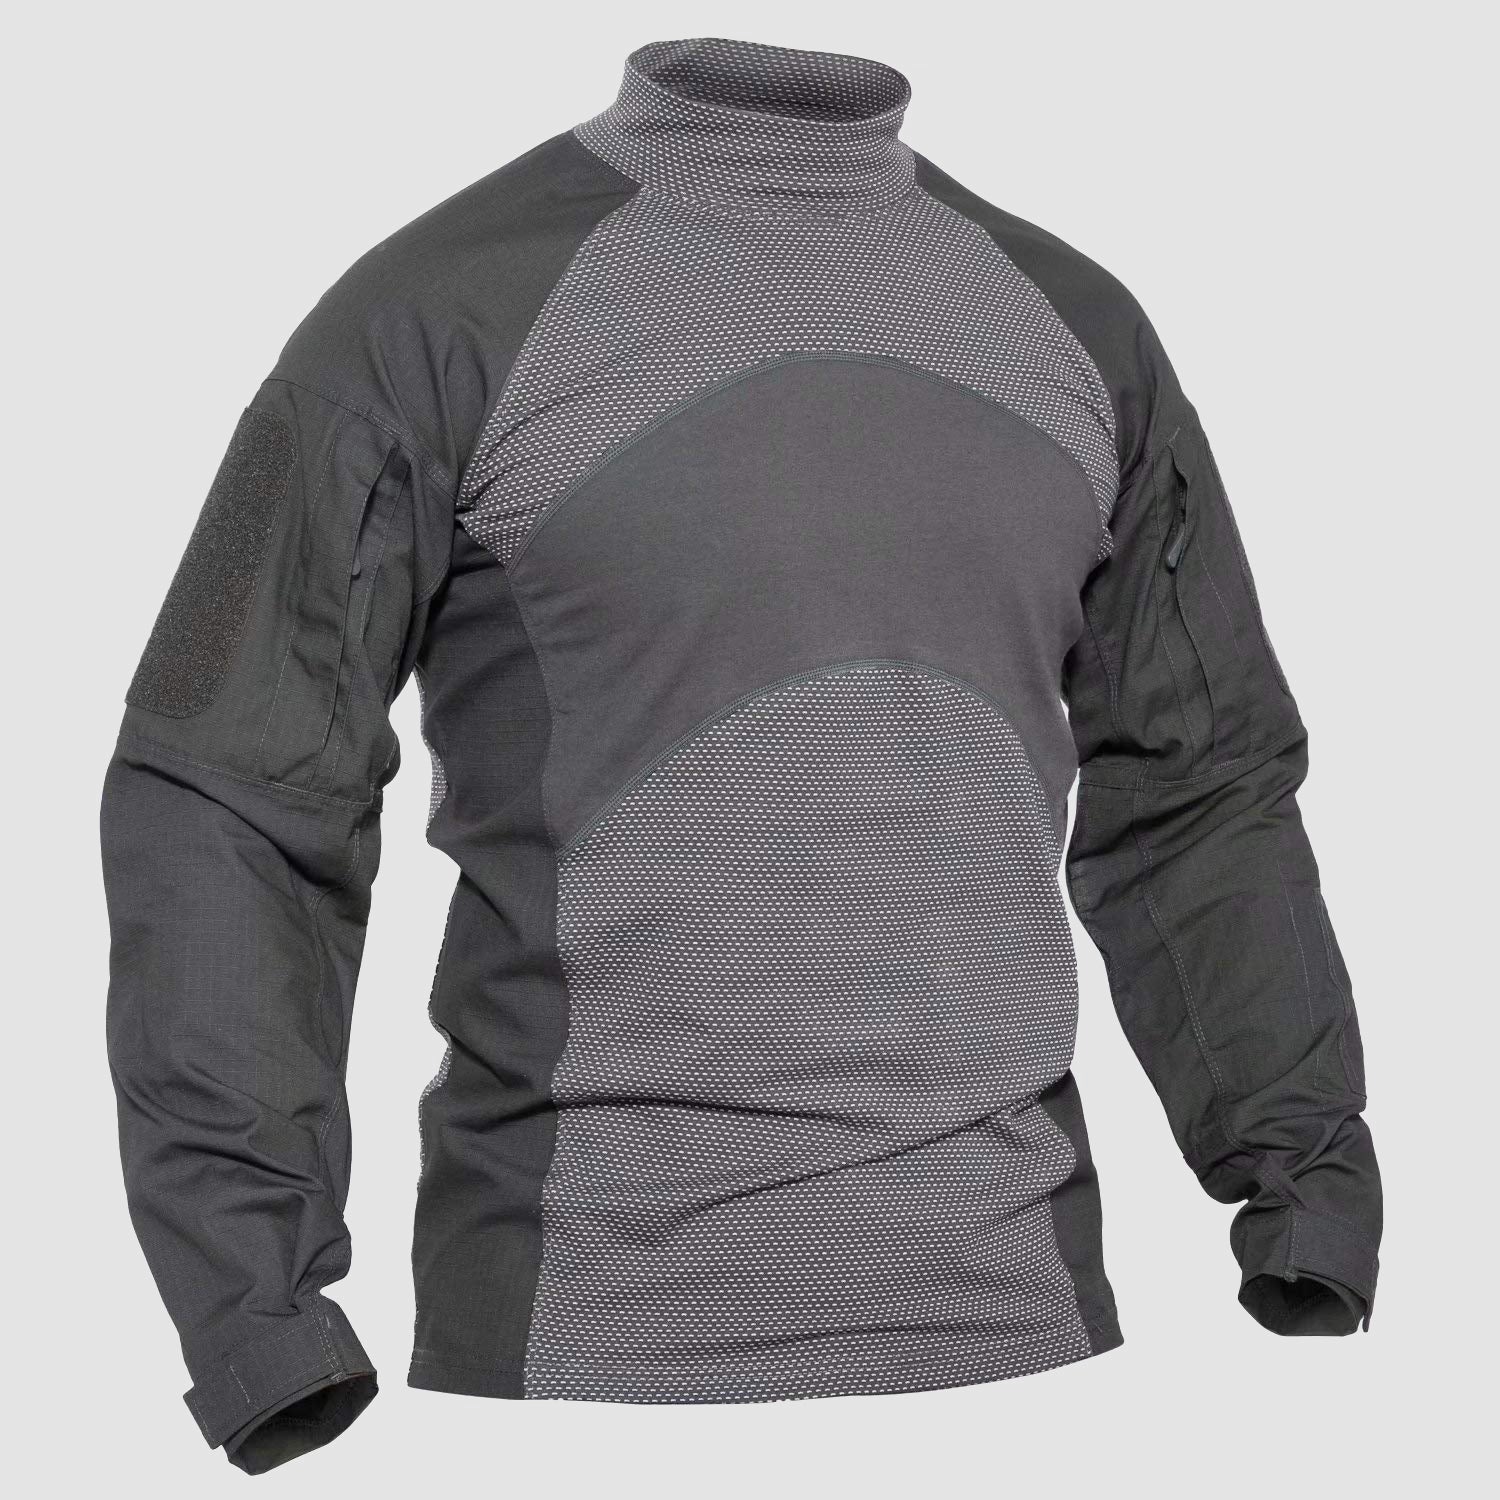 Men's Tactical Shirts Long Sleeve Military Combat Shirts with